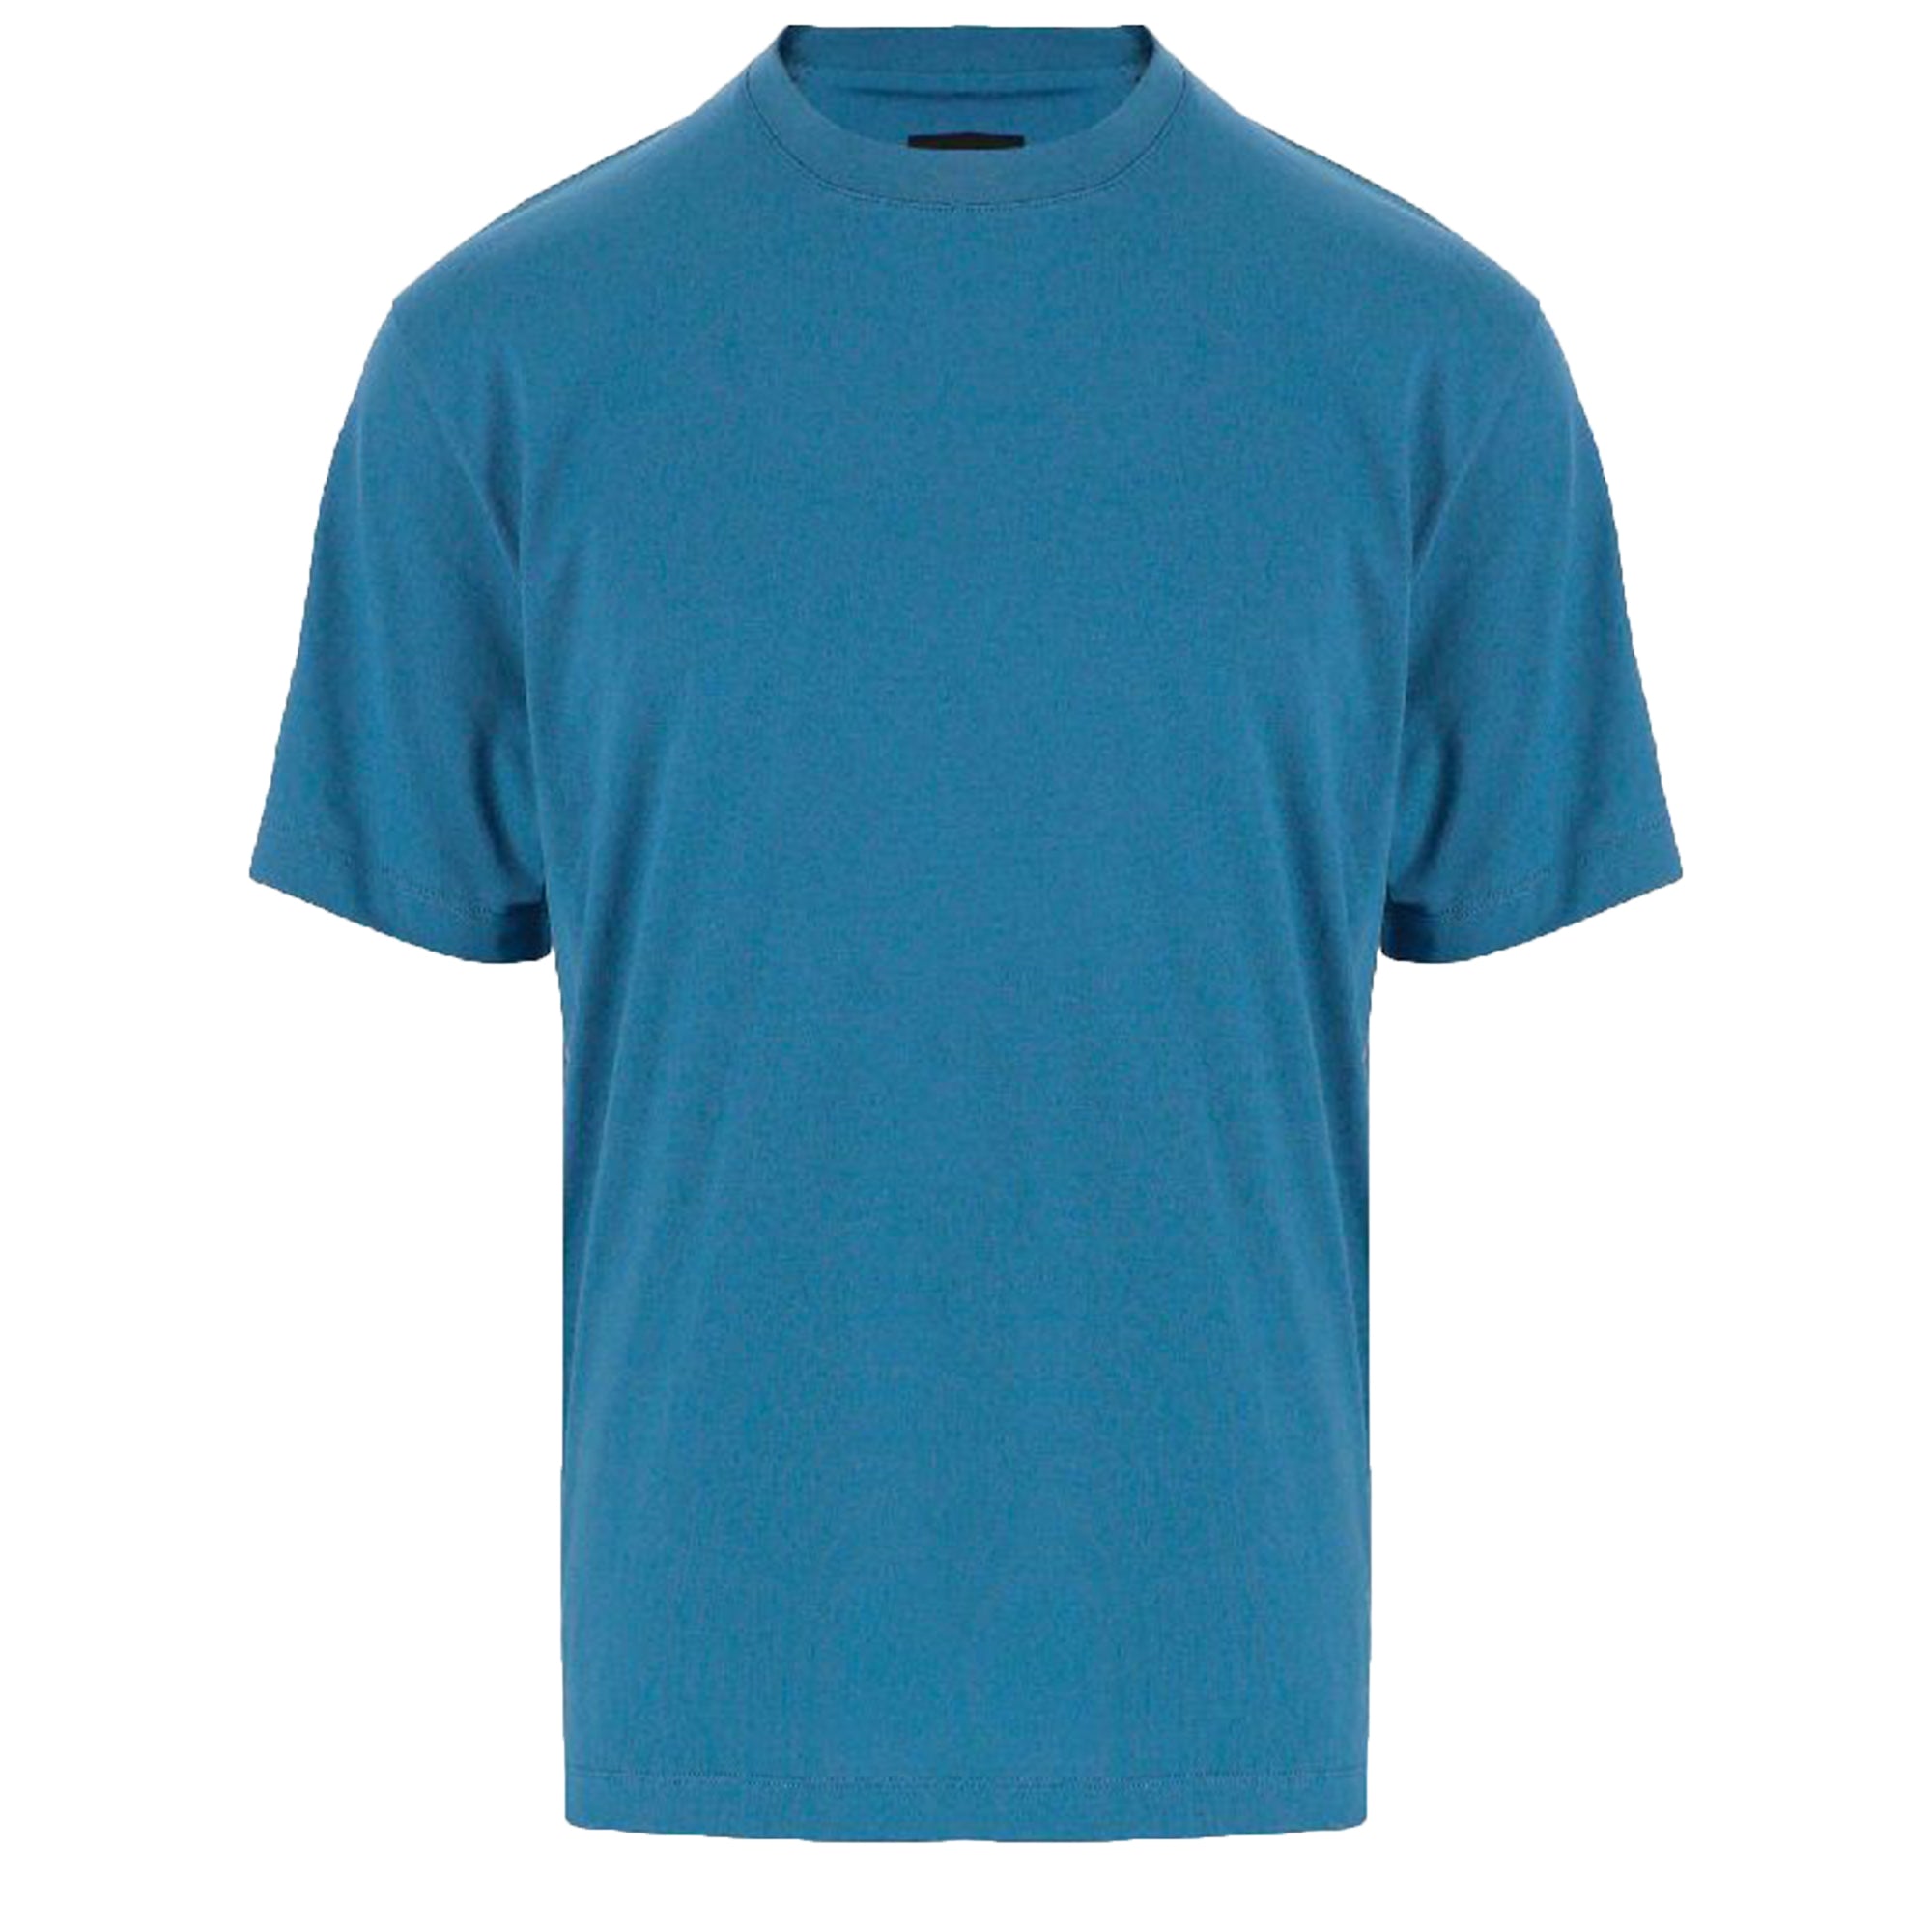 RELAXED SS TEE      ALTBLU